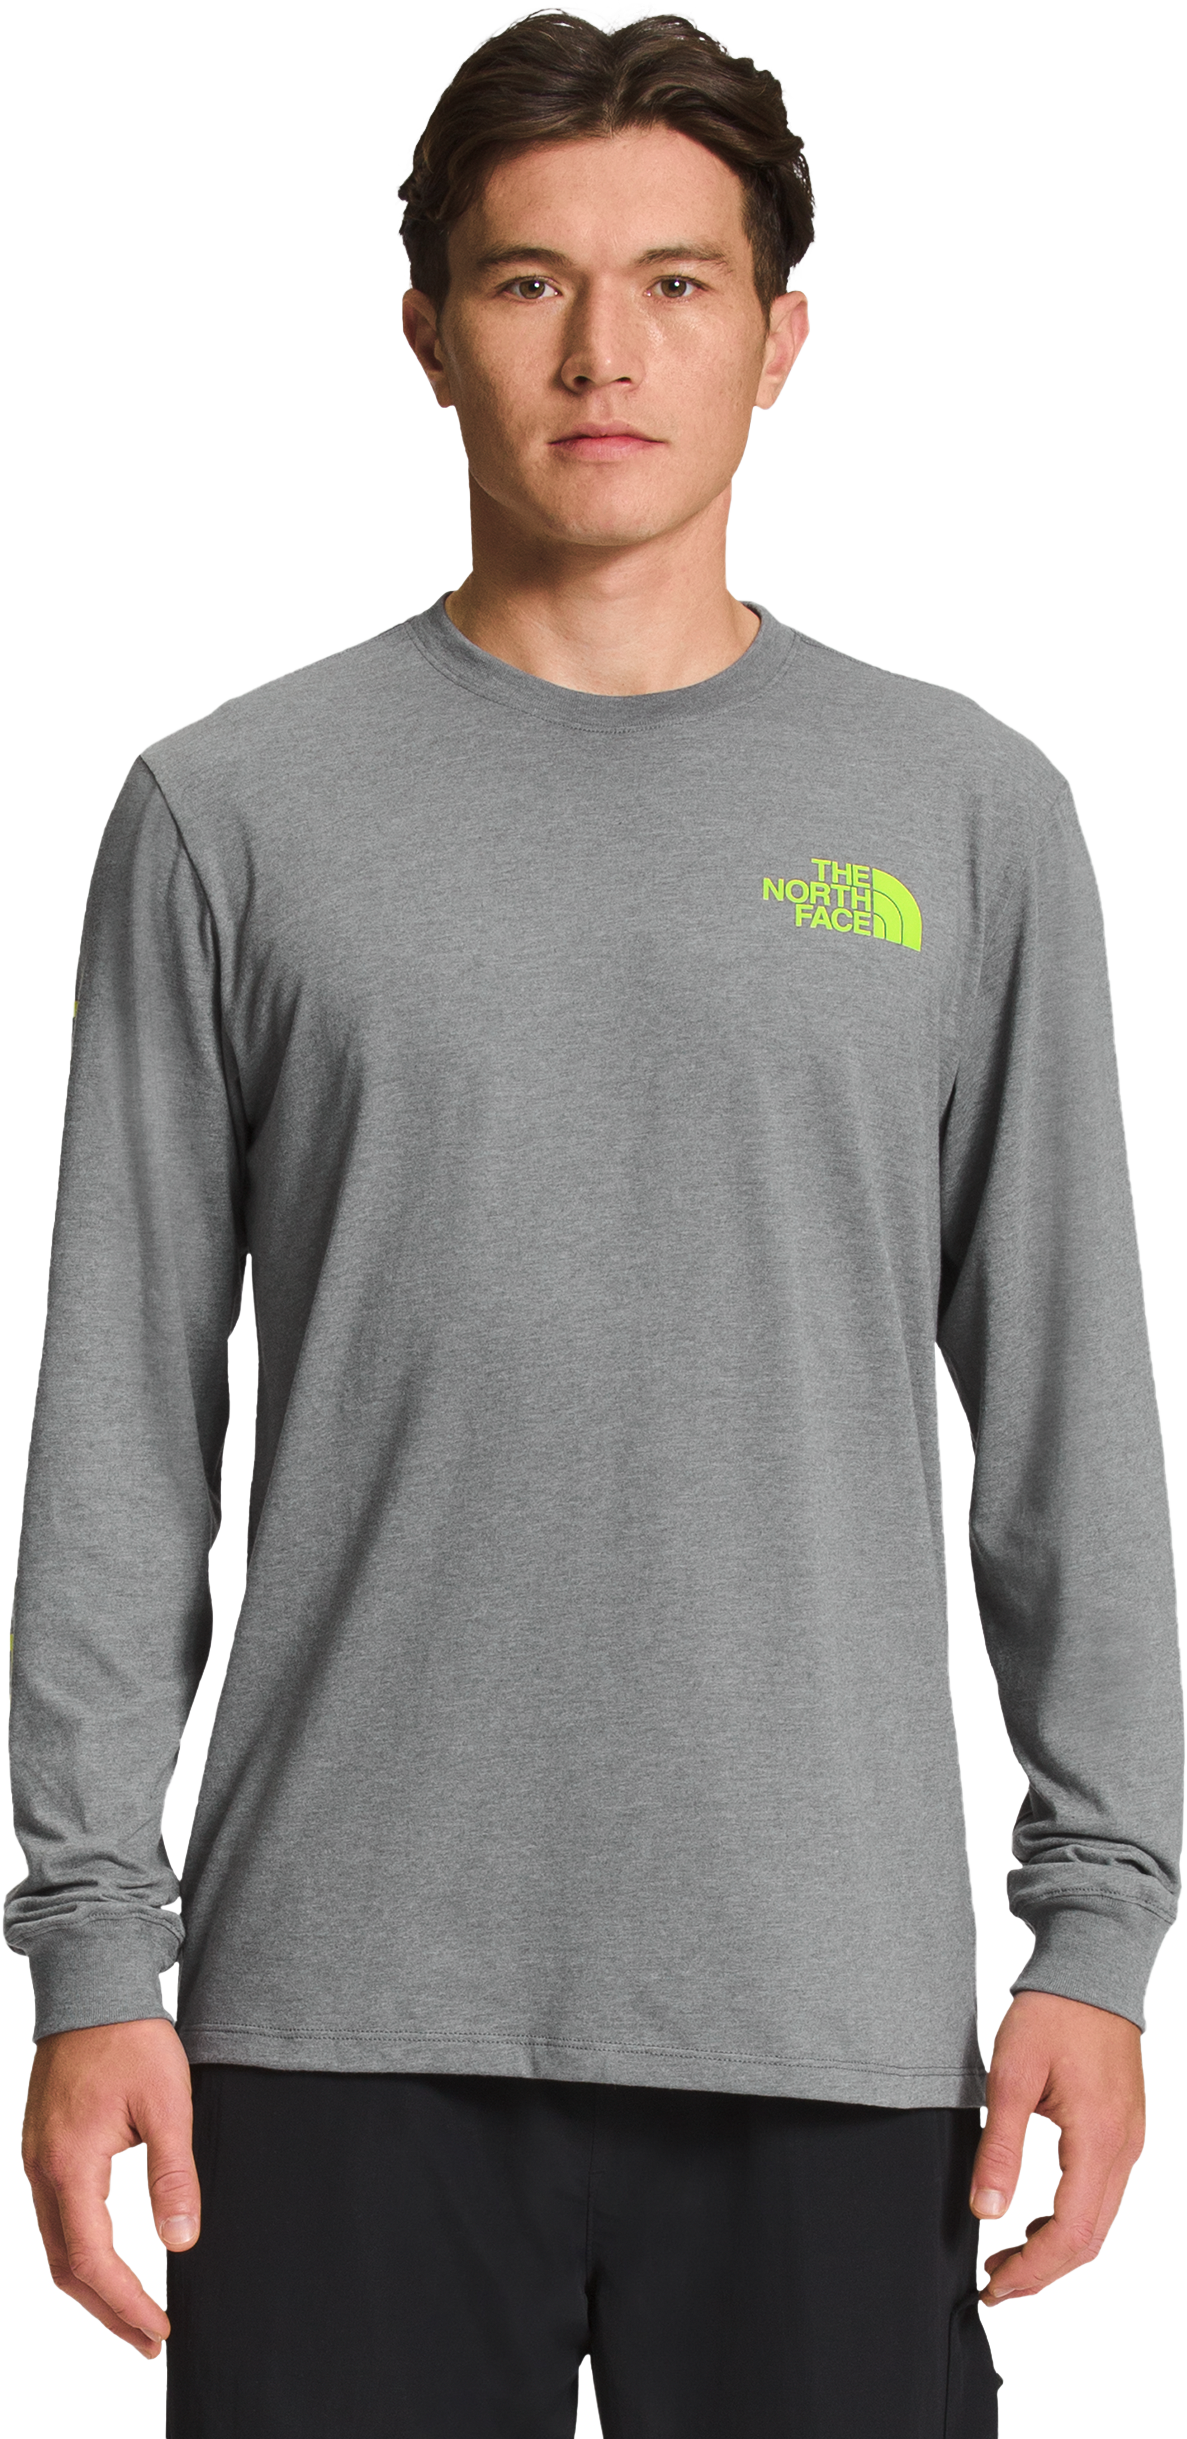 The North Face Hit Graphic Long-Sleeve T-Shirt for Men - TNF Medium Grey Heather/LED Yellow - L